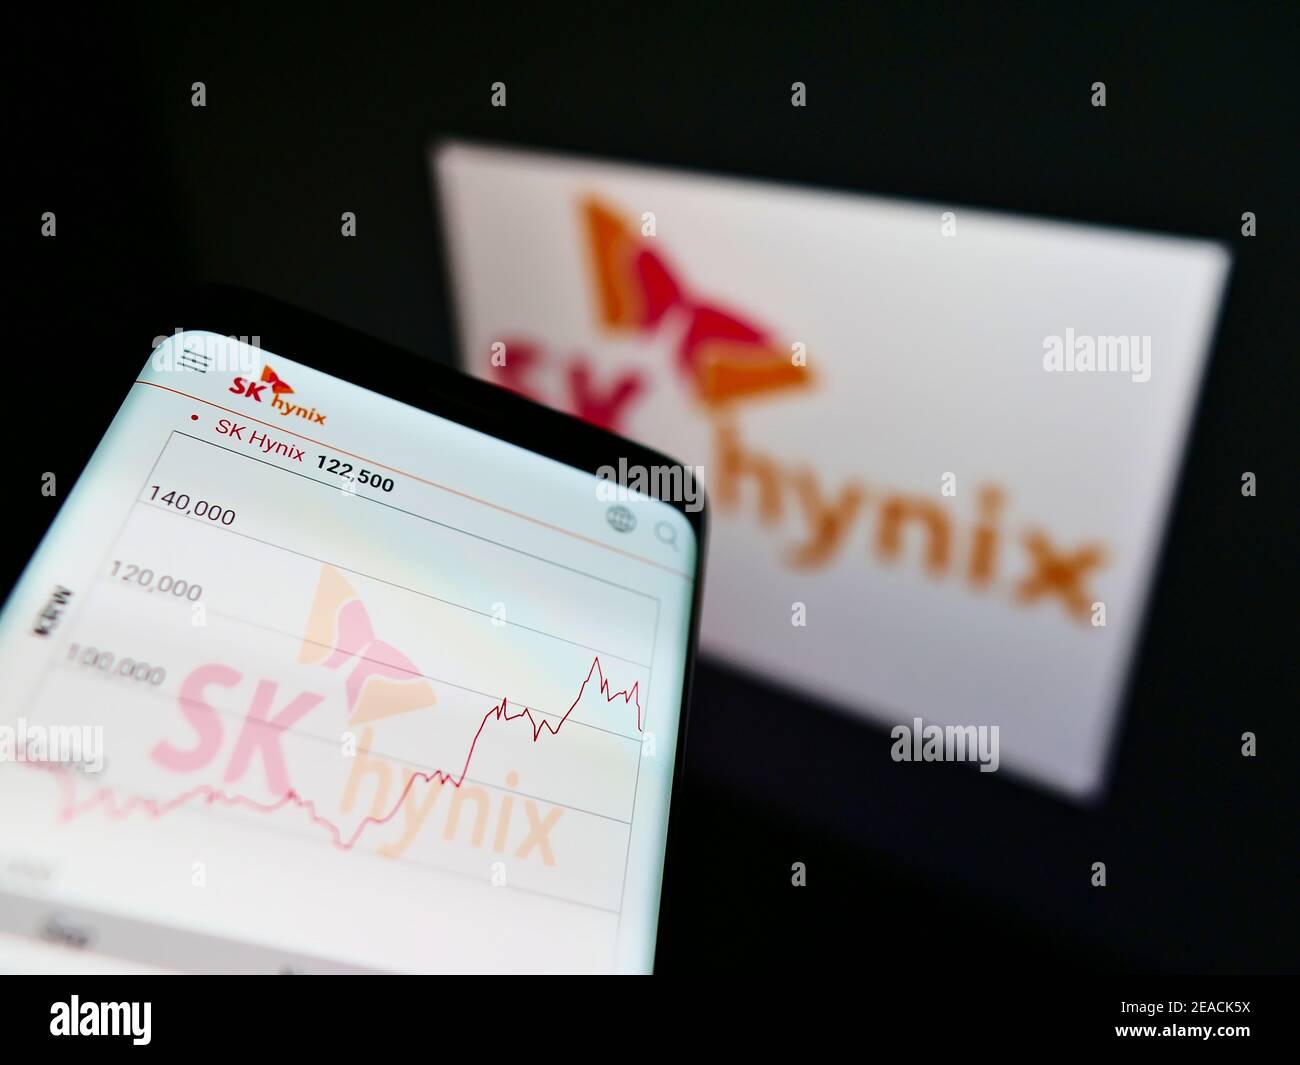 Smartphone with stock price chart of South Korean semiconductor manufacturer SK hynix on screen with logo. Focus on top-center of phone display. Stock Photo